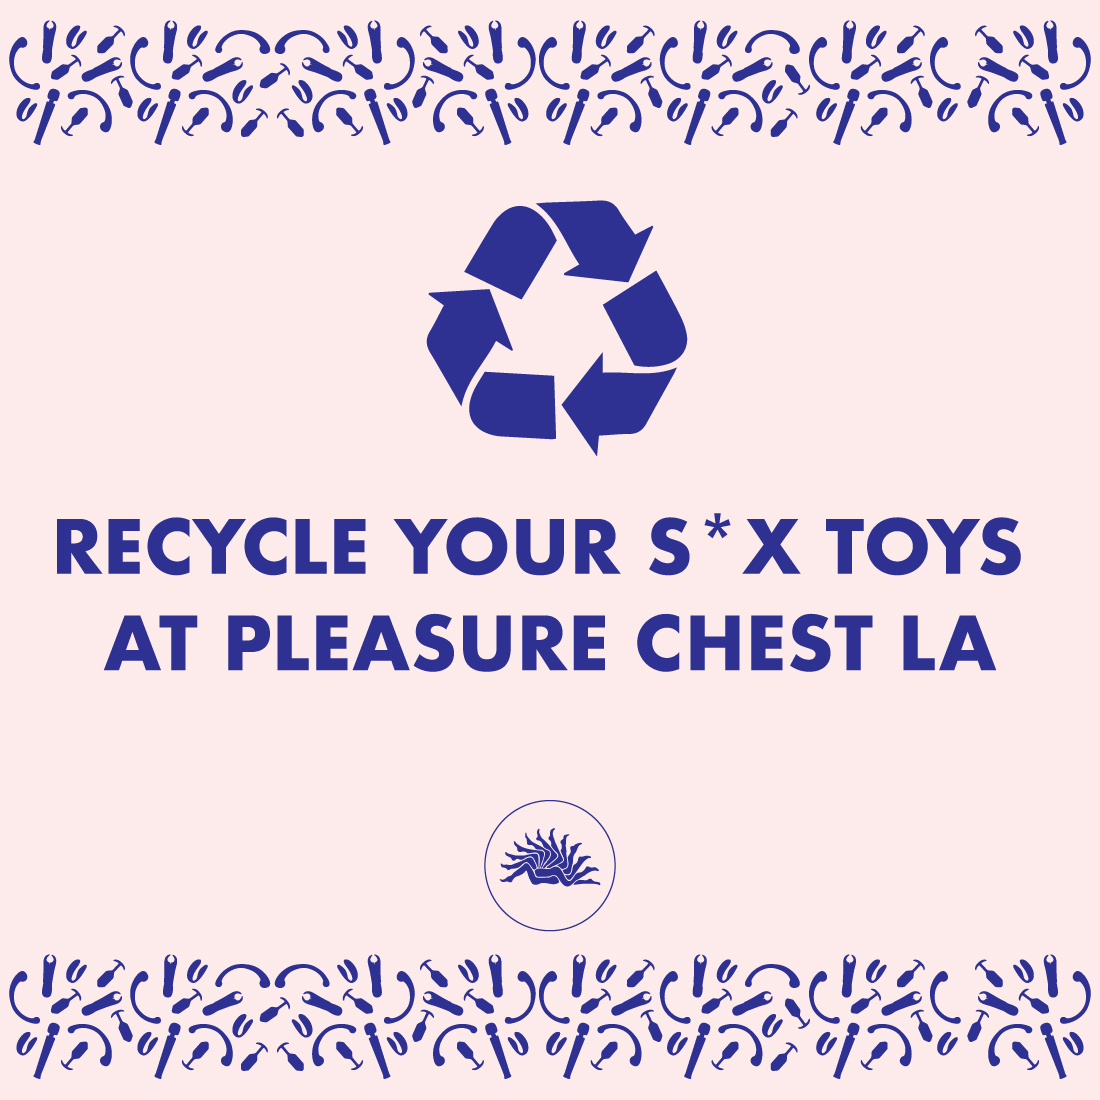 Recycle Your Sex Toys at Pleasure Chest LA